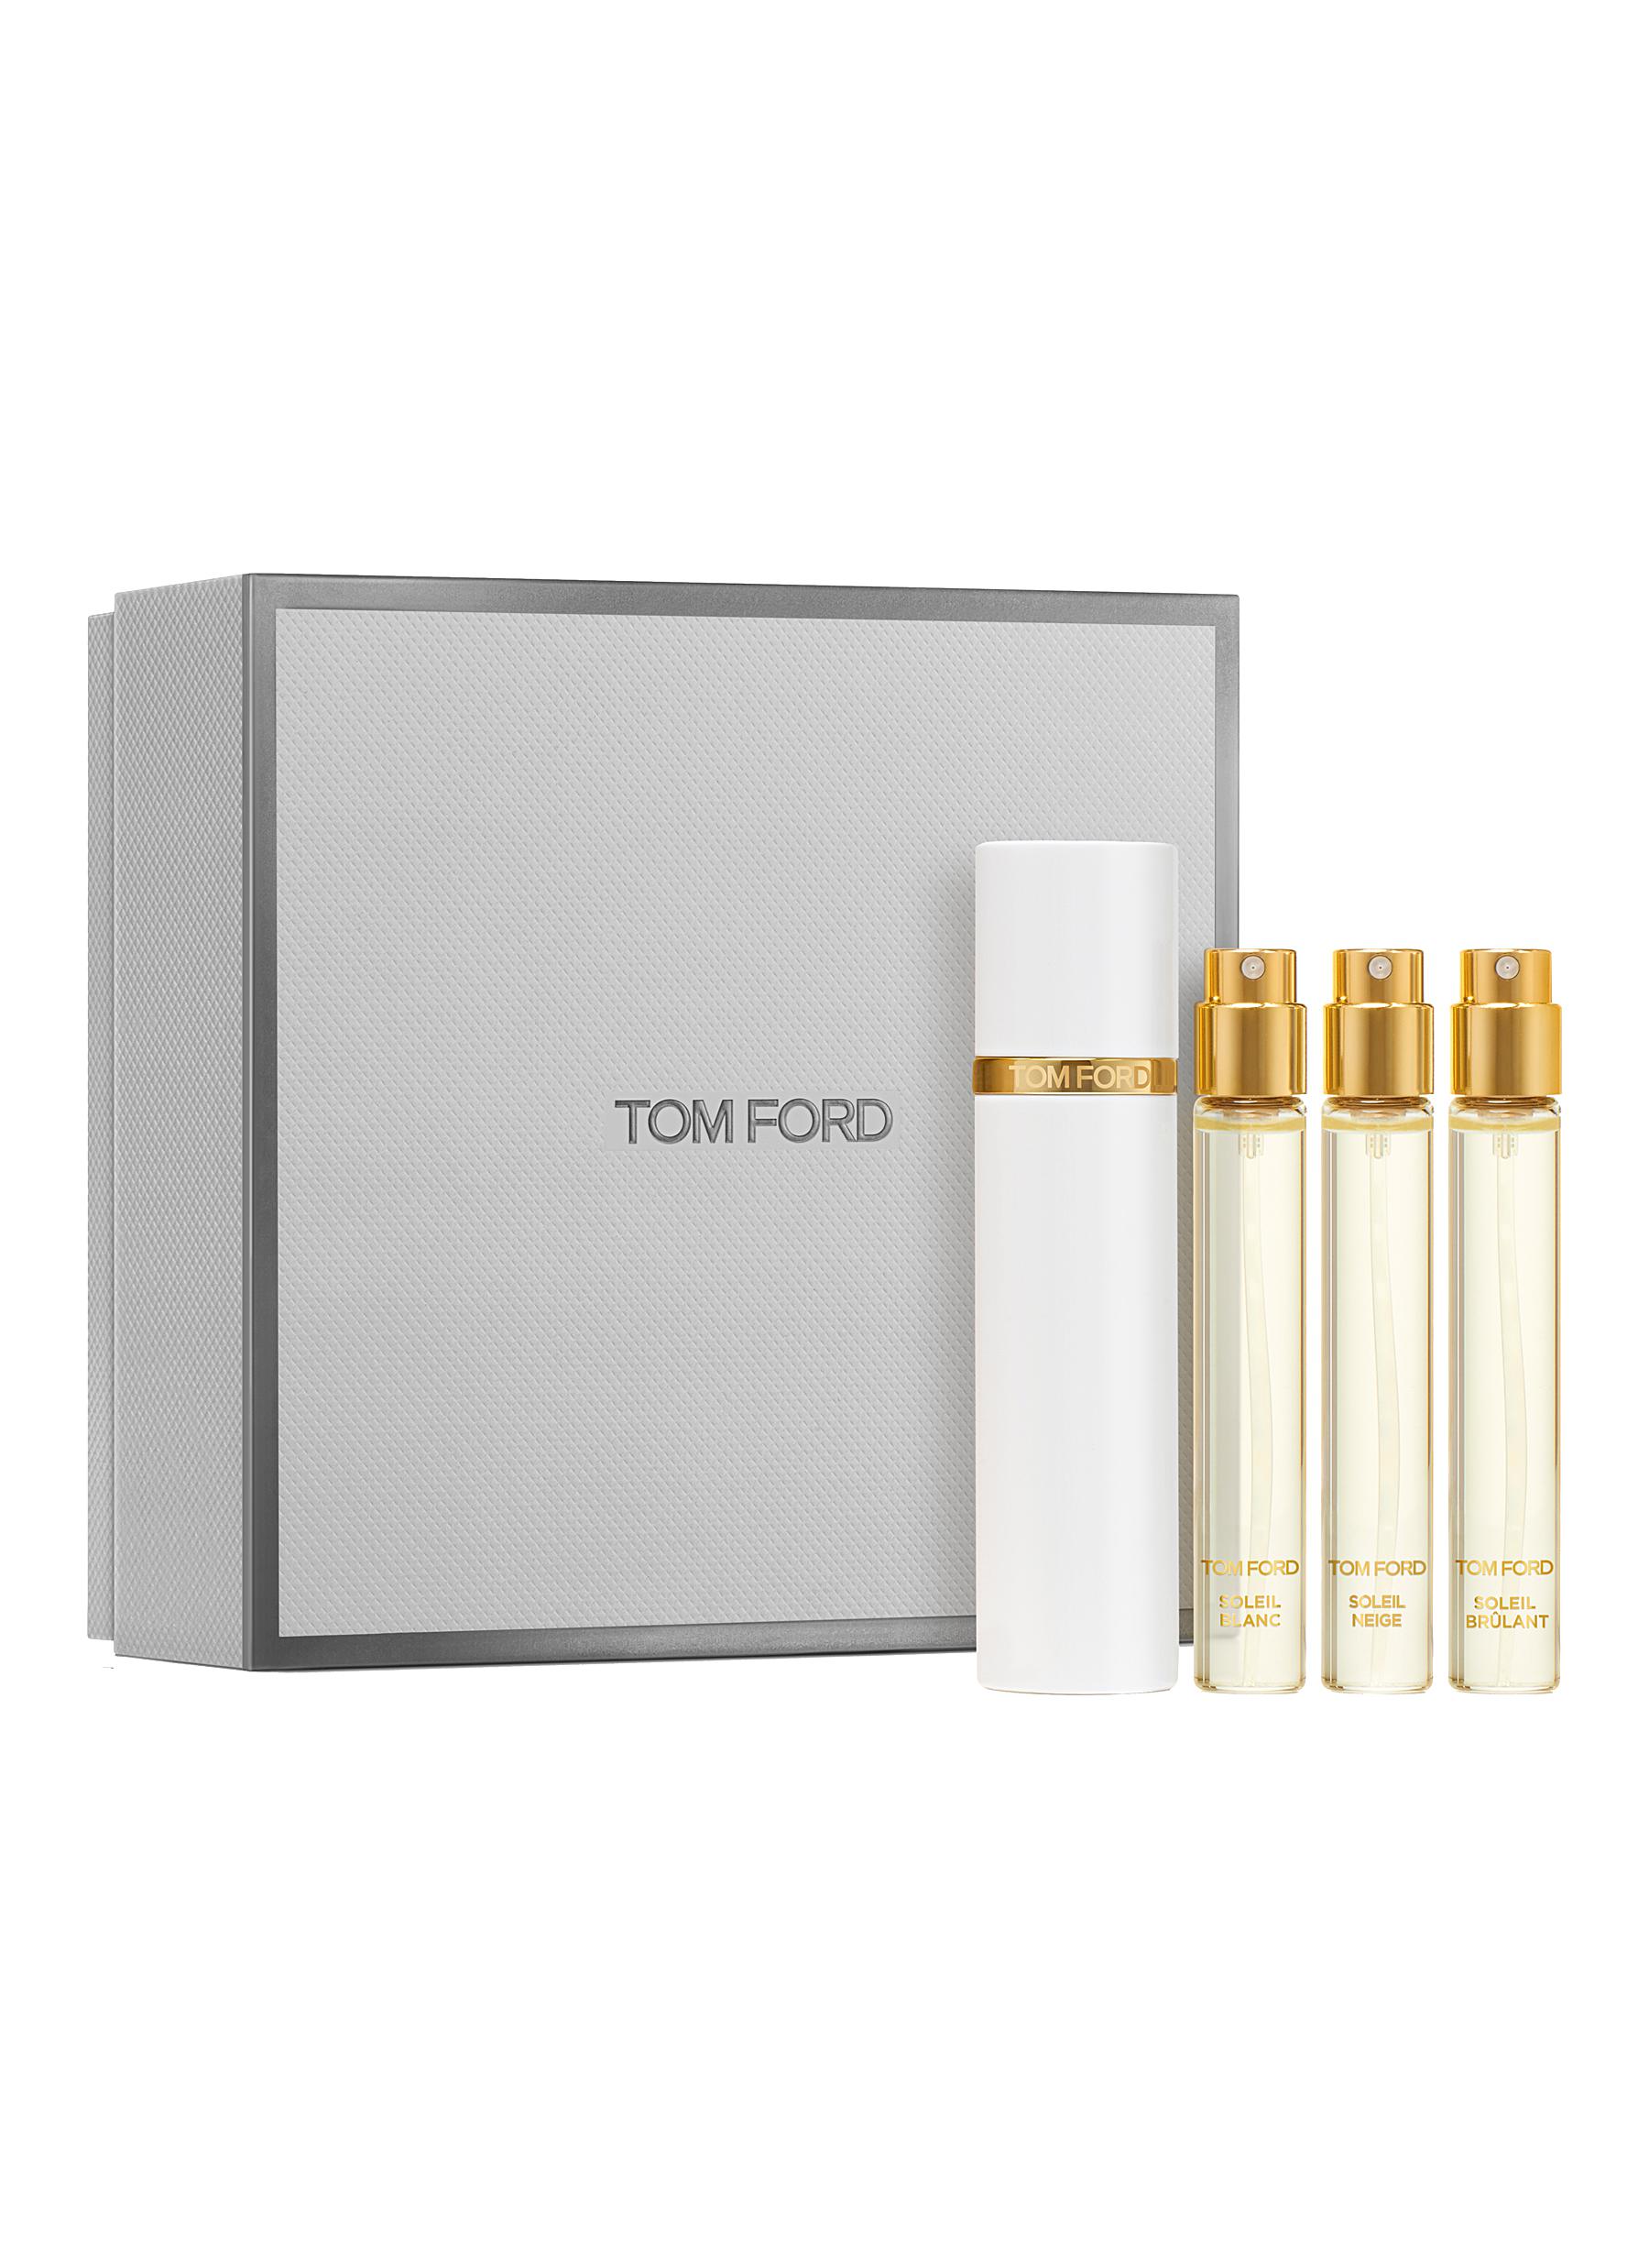 Tom Ford Private Blend Eau De Parfum Discovery Collection MYER |  .ng